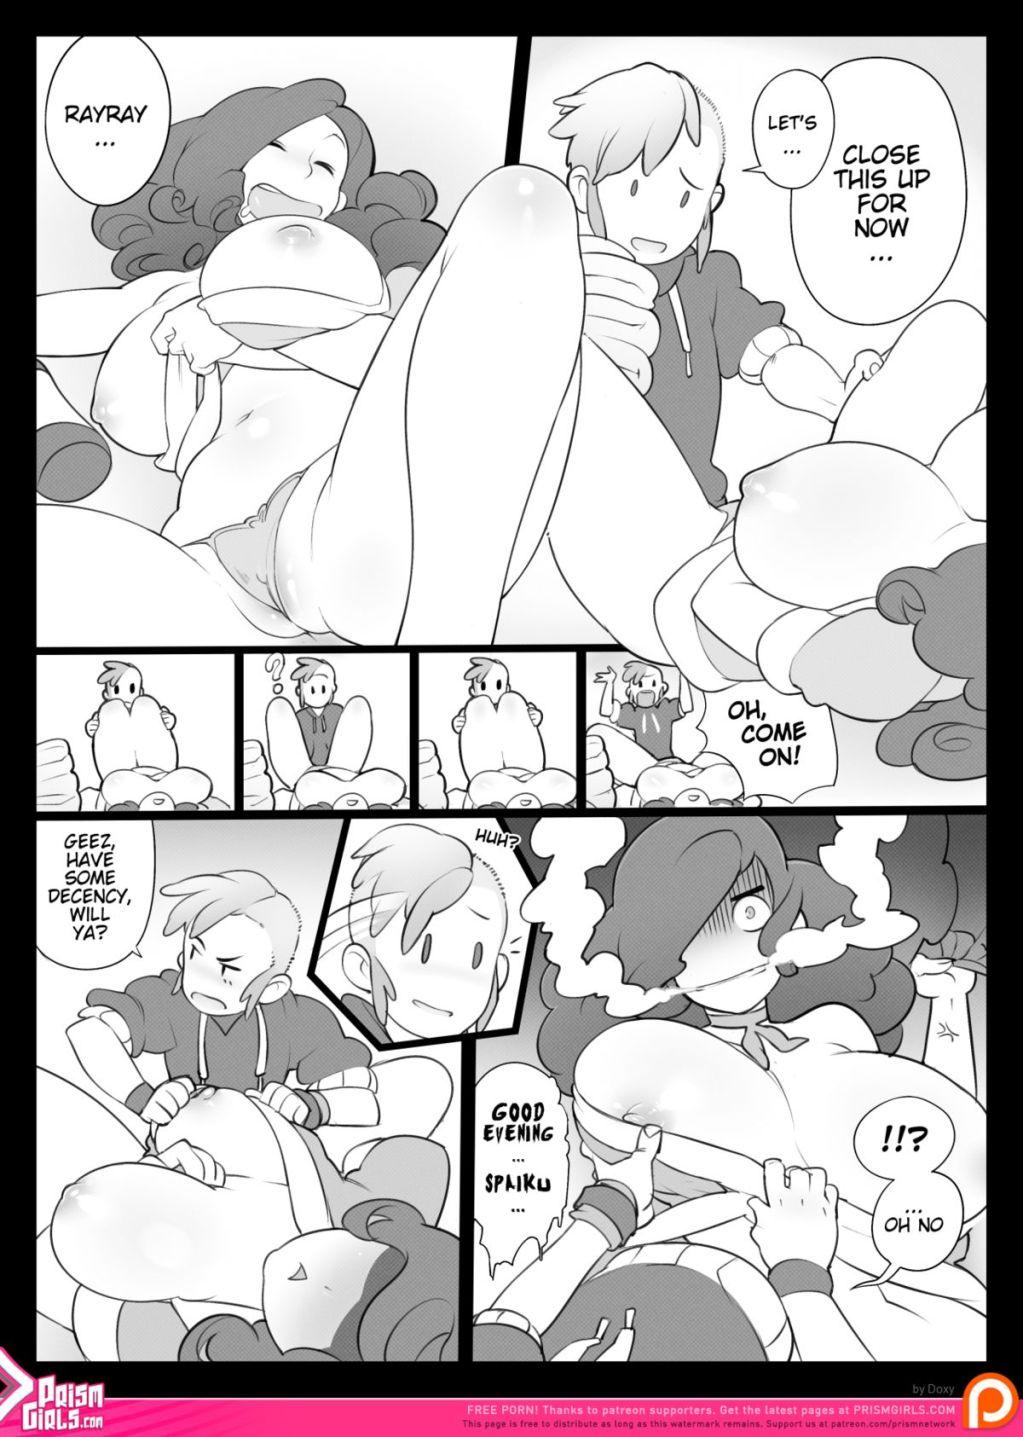 Interacial In a Pinch! Free Fuck - Page 2